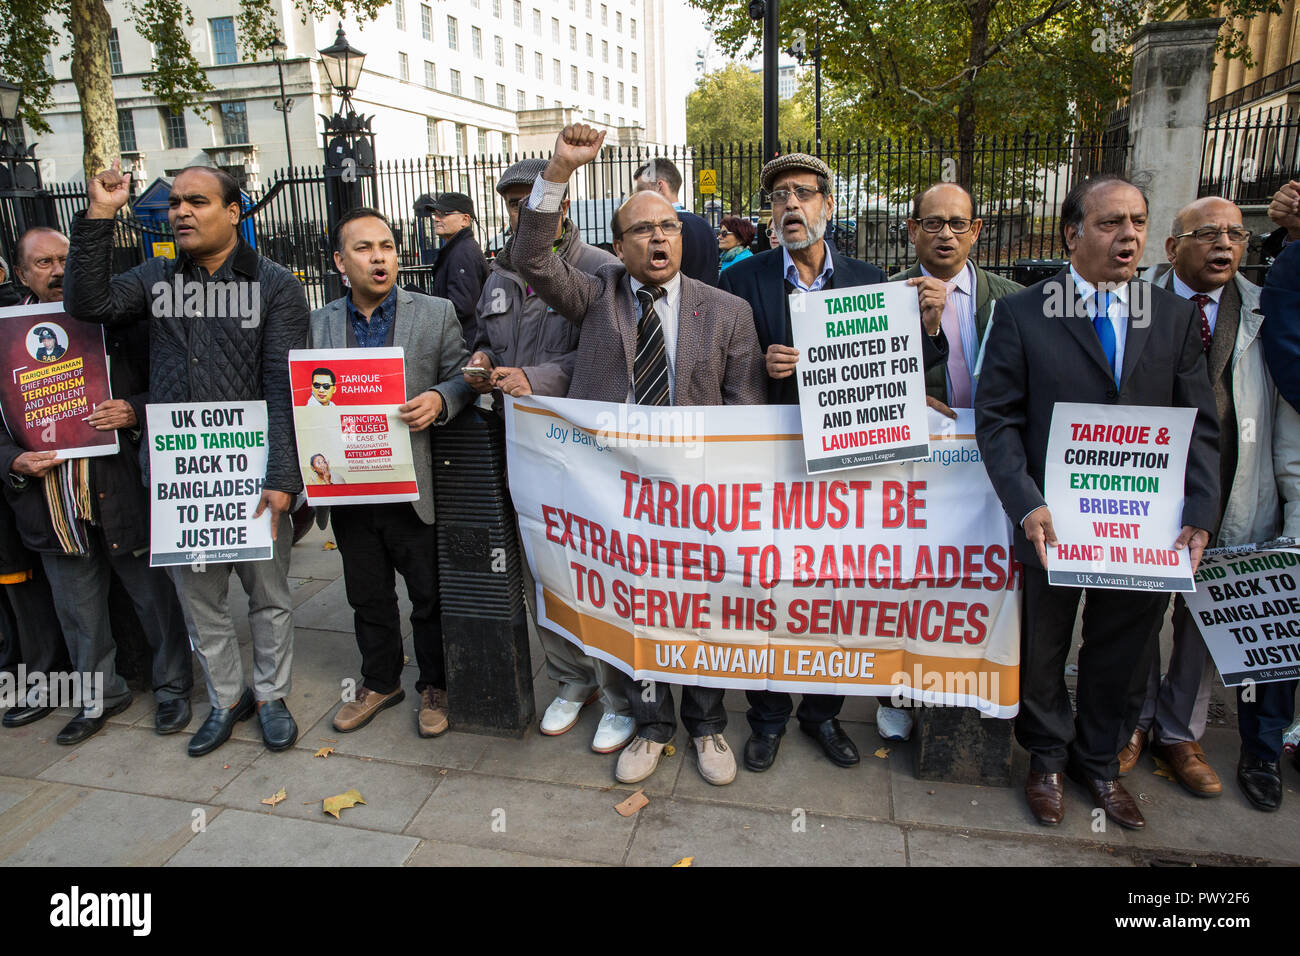 London, UK. 18th October, 2018. Campaigners from the UK Awami League, supporters of the current Government of Bangladesh under Prime Minister Sheikh Hasina, protest in Whitehall opposite Downing Street to call on the British Government to extradite Tarique Rahman, acting chairman of Bangladesh Nationalist Party, to Bangladesh. Tarique Rahman successfully applied for political asylum in the UK in 2008 and has since been granted indefinite leave to remain. Credit: Mark Kerrison/Alamy Live News Stock Photo